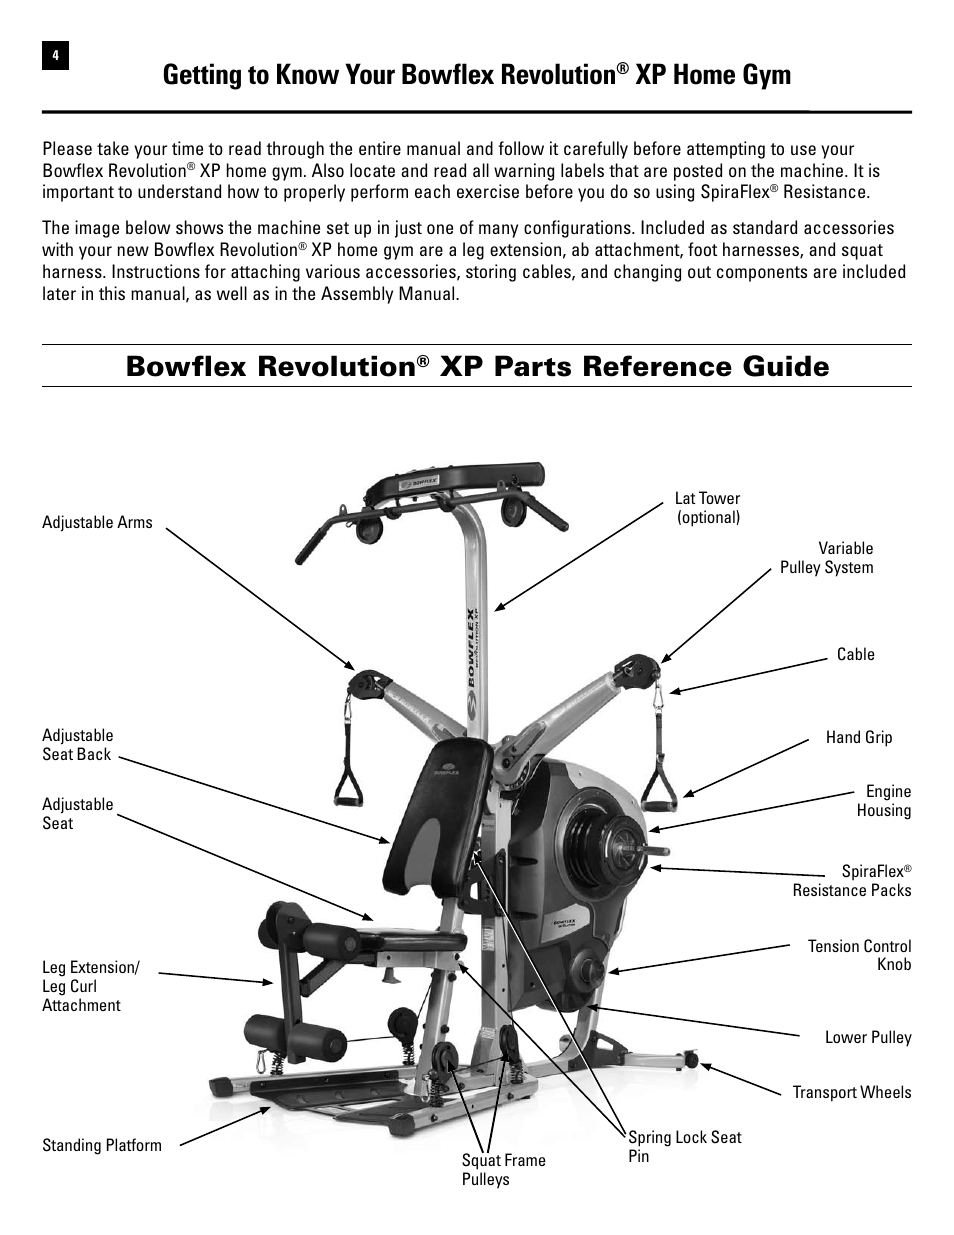 Bowflex revolution, Xp parts reference guide, Getting to know your ...